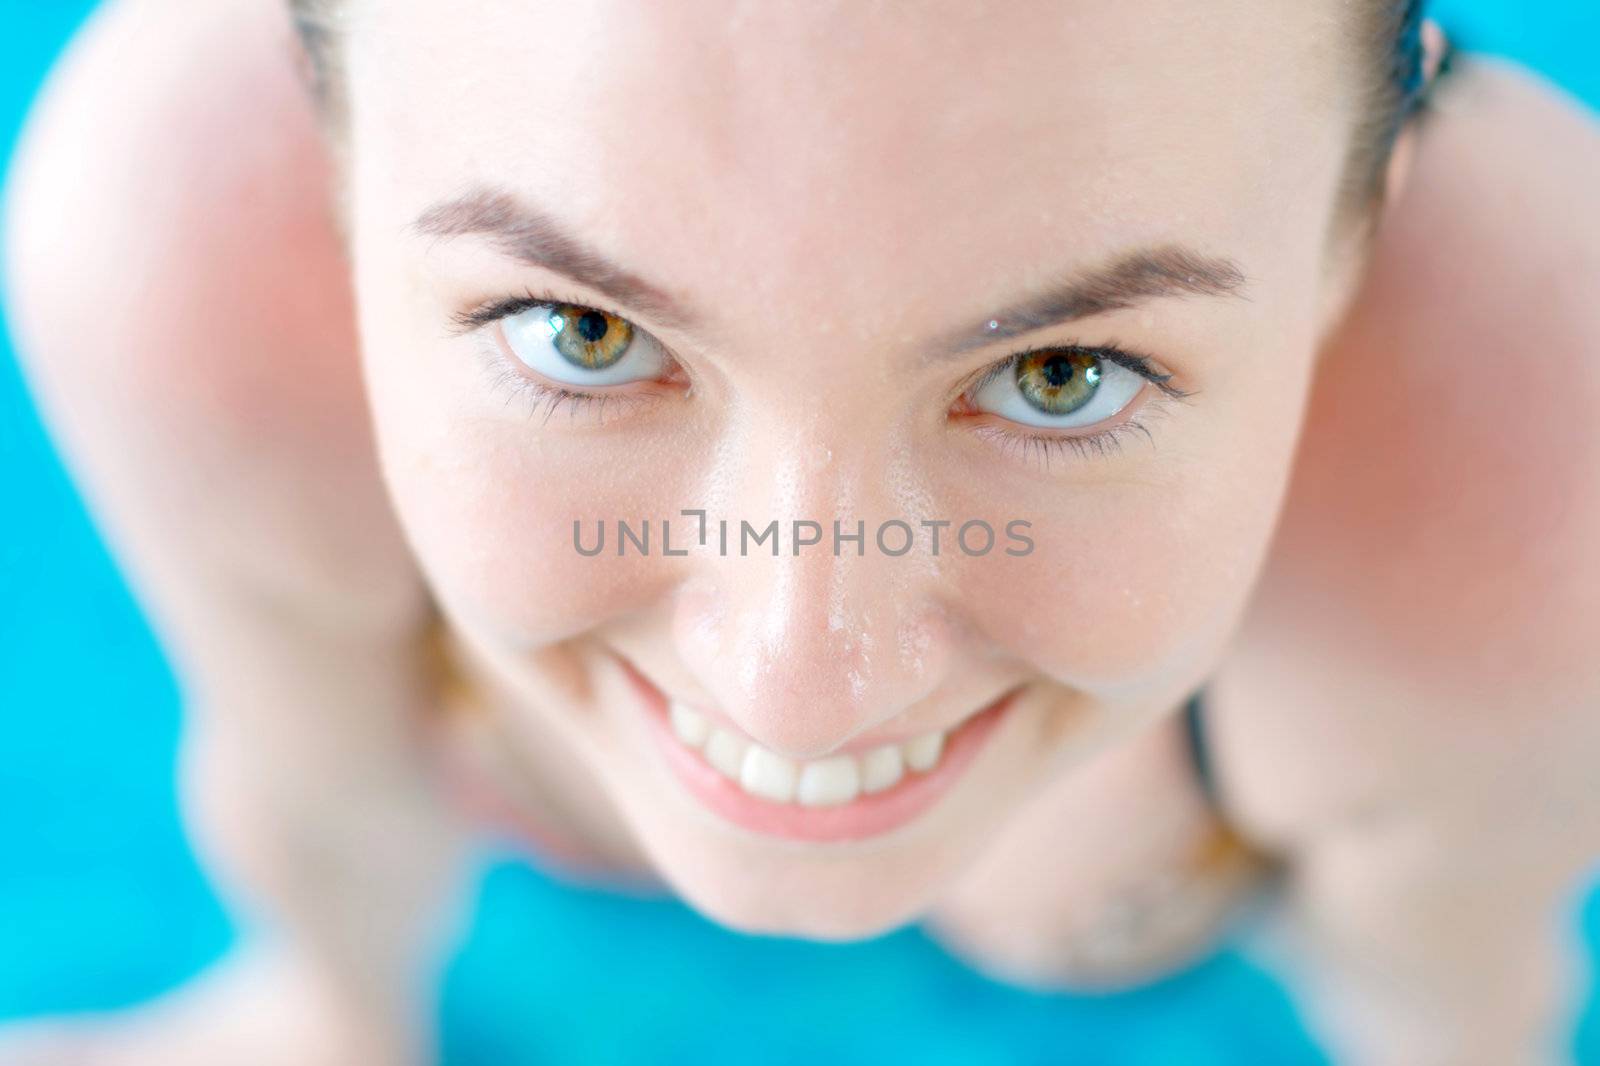 Smiling girl at the swimming pool by rosspetukhov